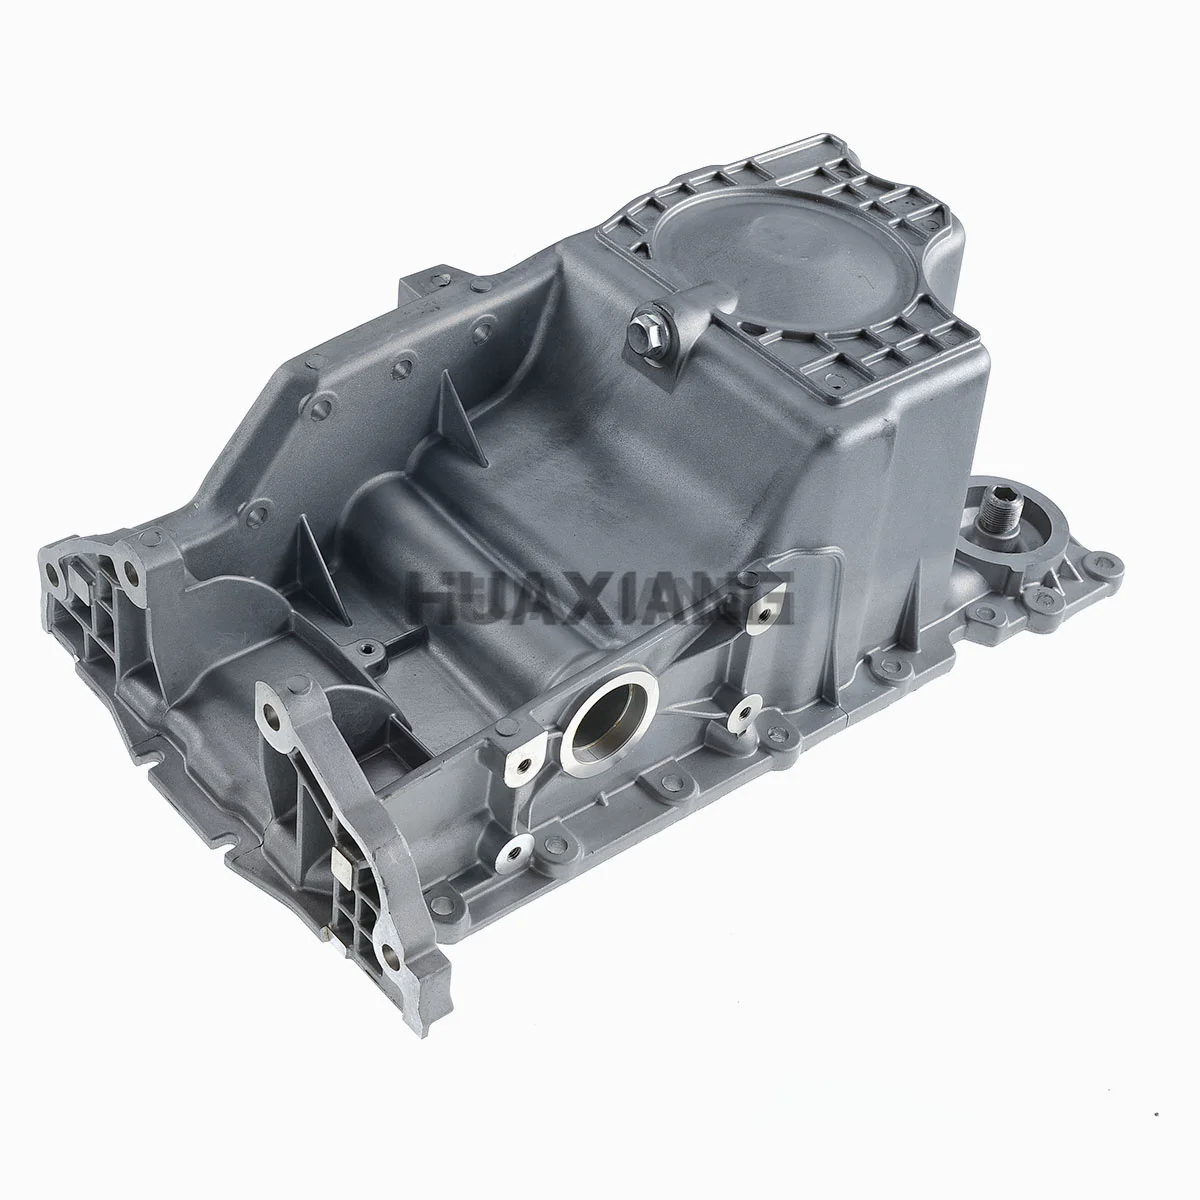 

A3 Repair Shop RTS Engine Oil Pan for Chrysler 300 Dodge Charger Magnum V6 3.5L 2008-2010 4792963AD 4792963AE